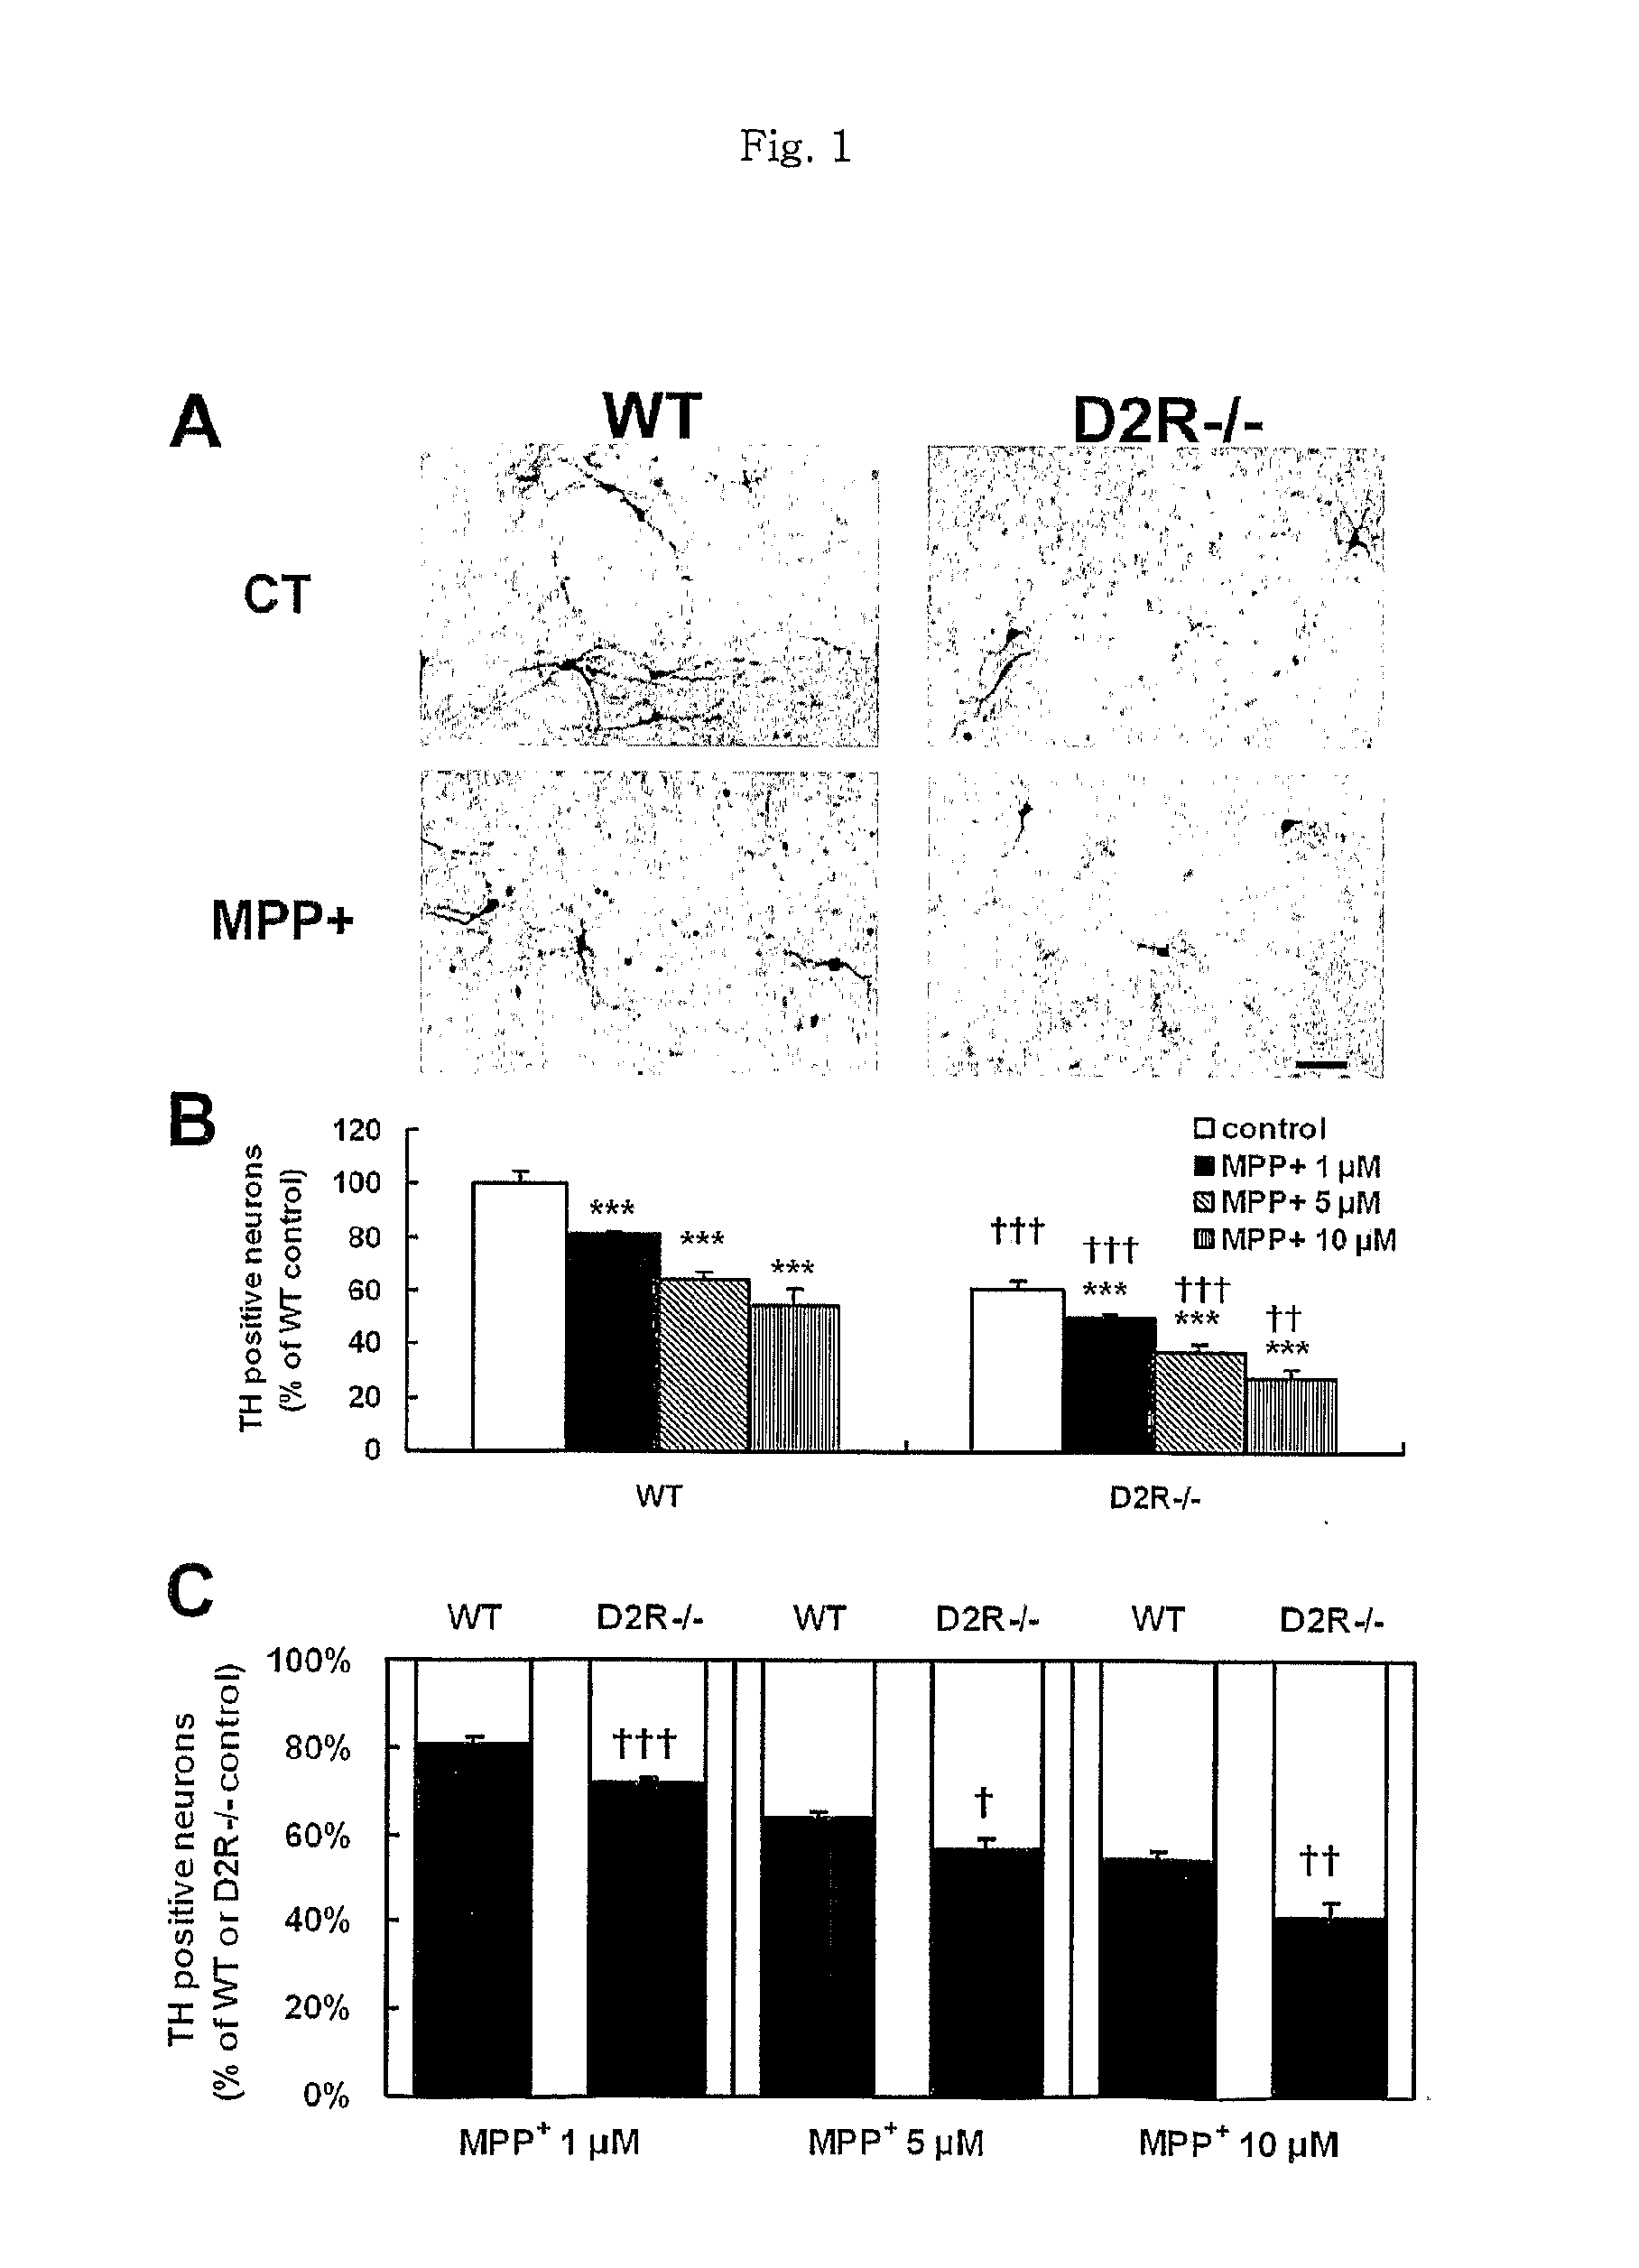 Methods For Modulating The Development Of Dopamine Neuron By The Dopamine D2 Receptor And Compositions Thereof